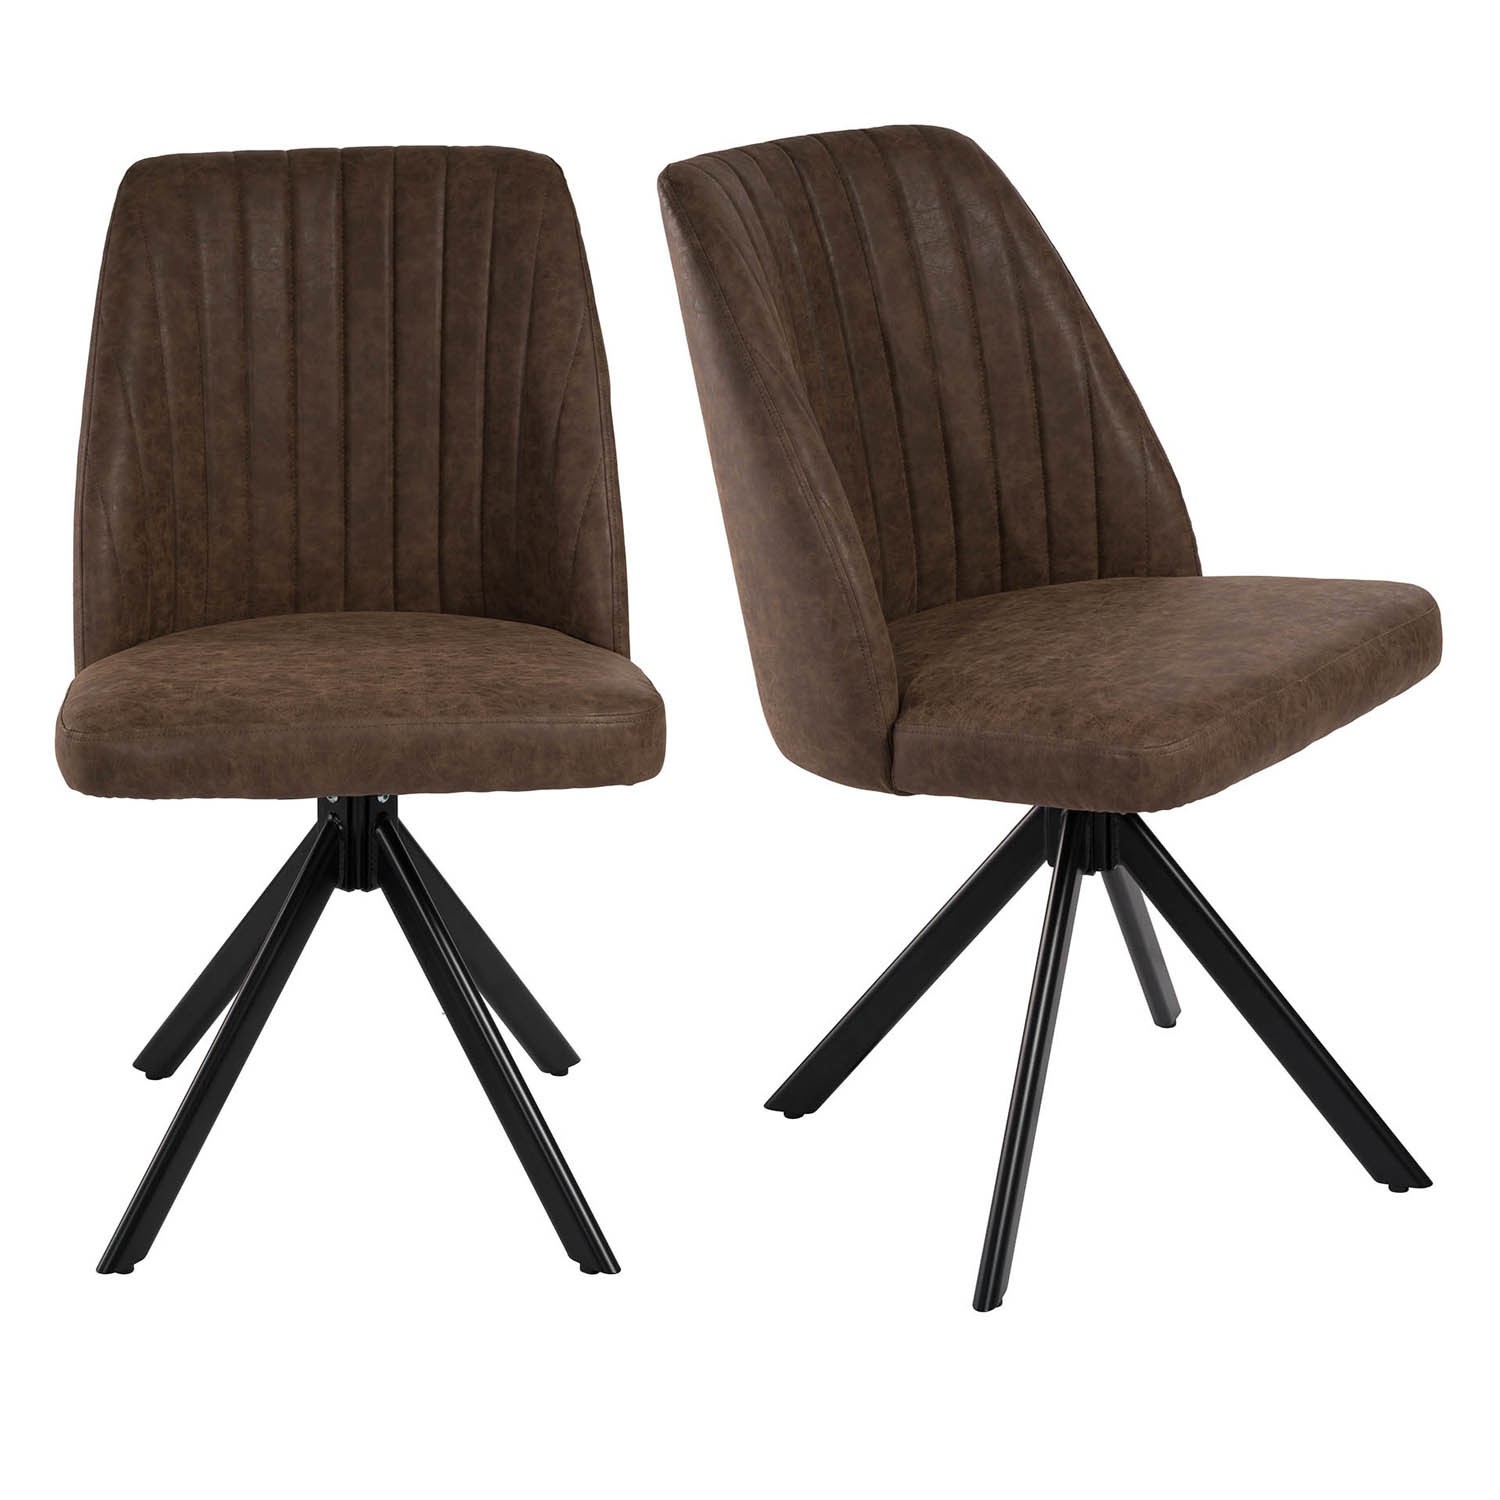 Photo of Set of 2 brown faux leather swivel dining chairs - logan